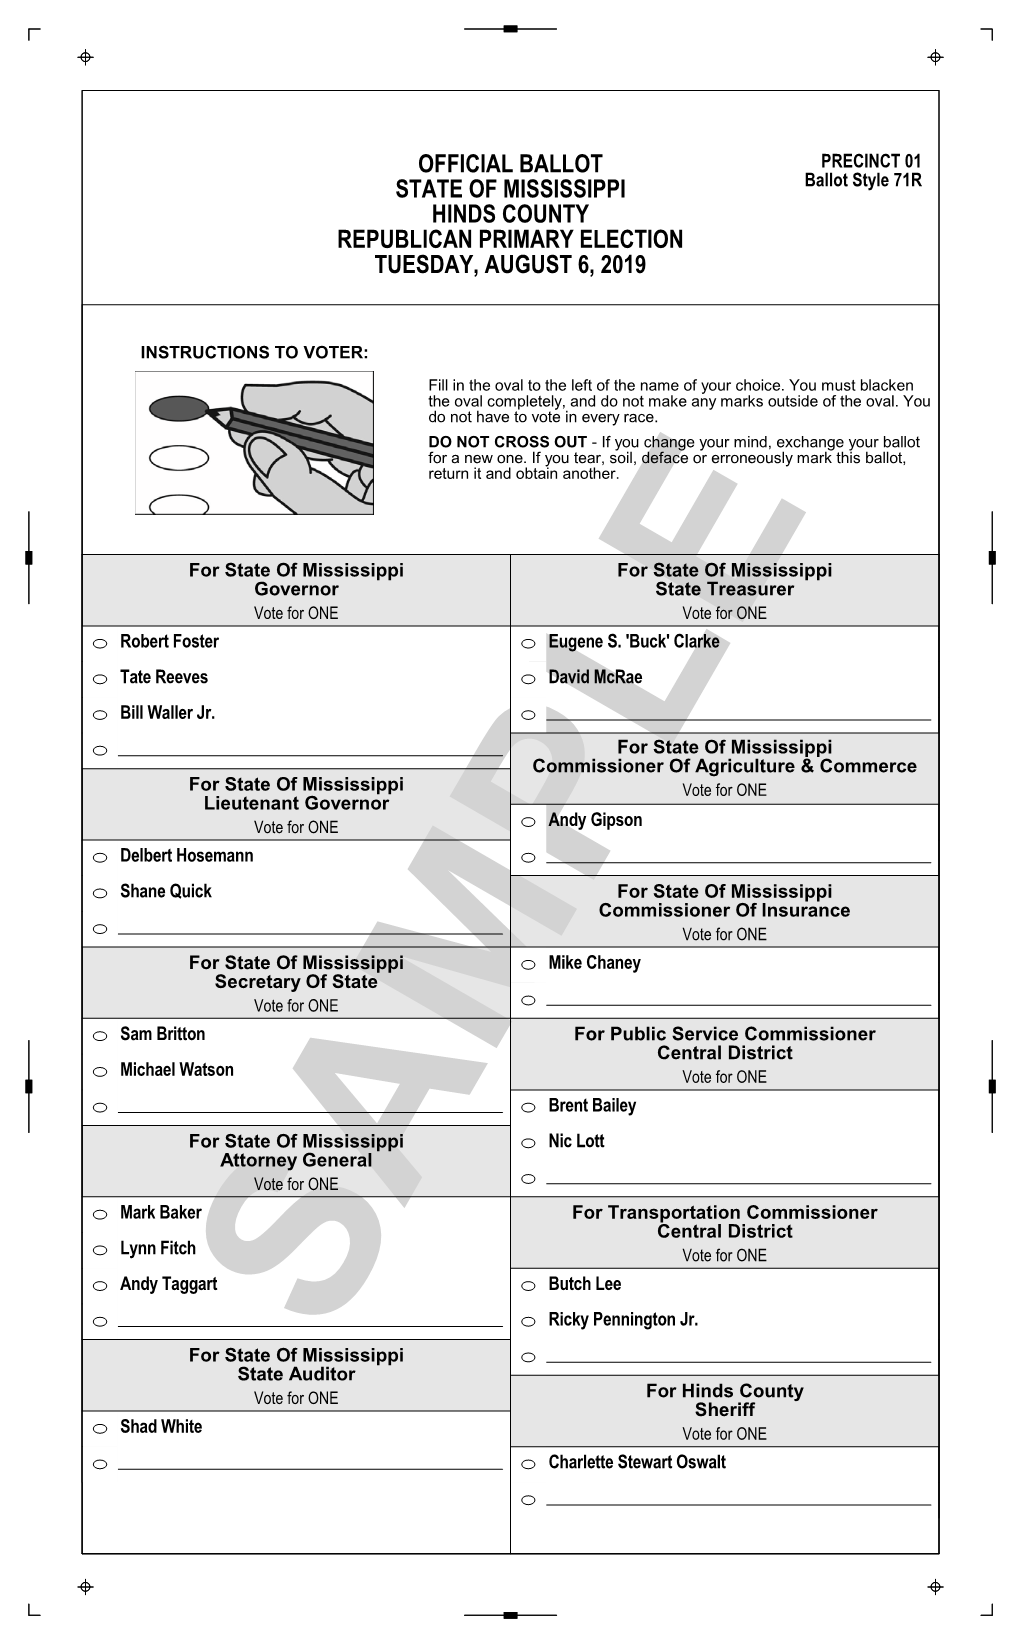 Official Ballot State of Mississippi Hinds County